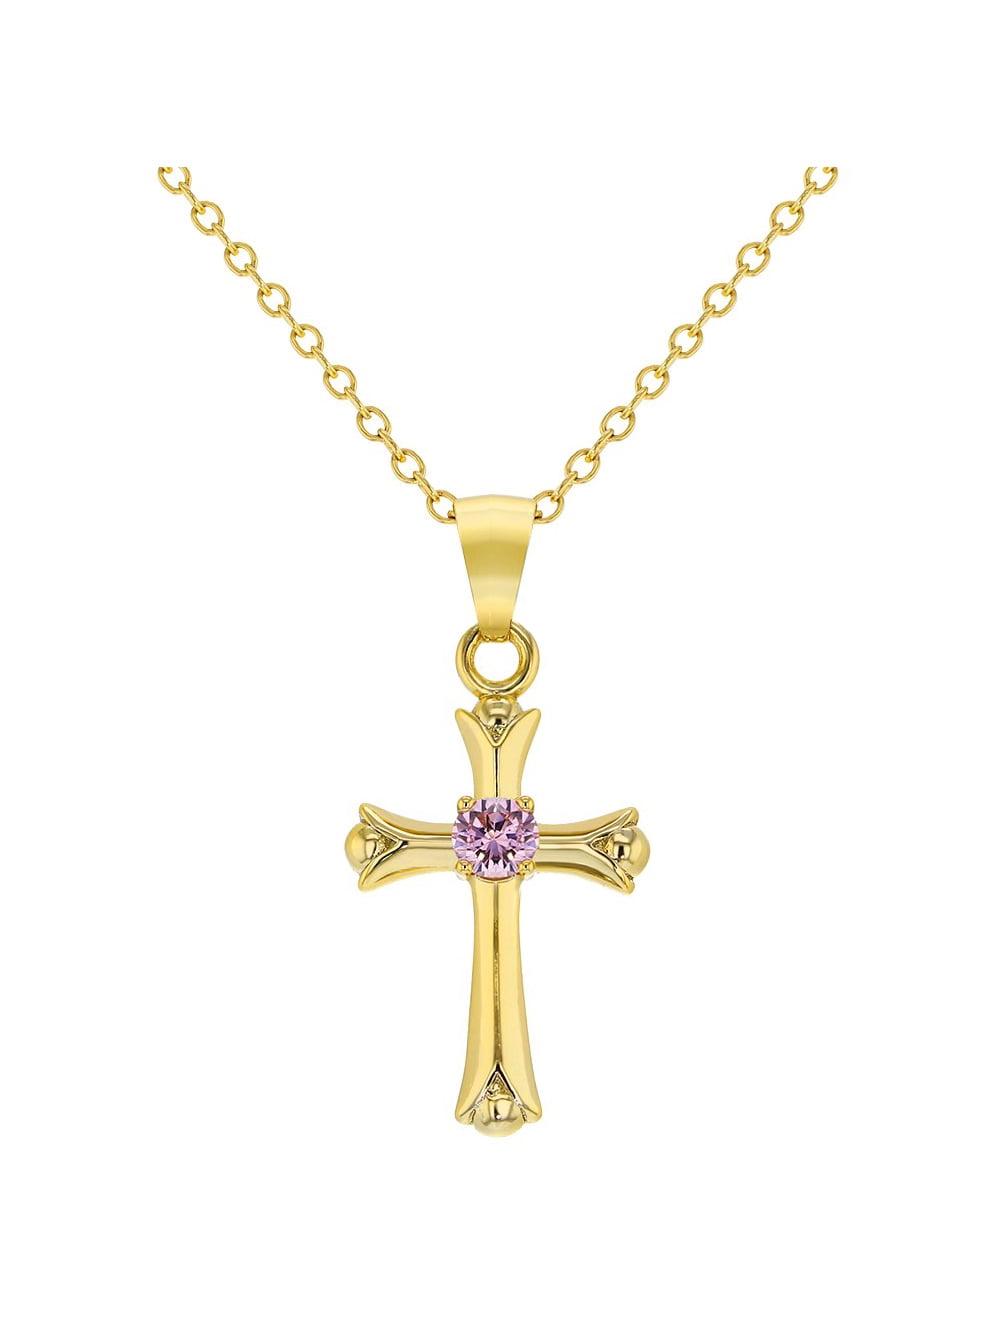 13mm in 18K yellow gold Small Solid Plain Cross Charm